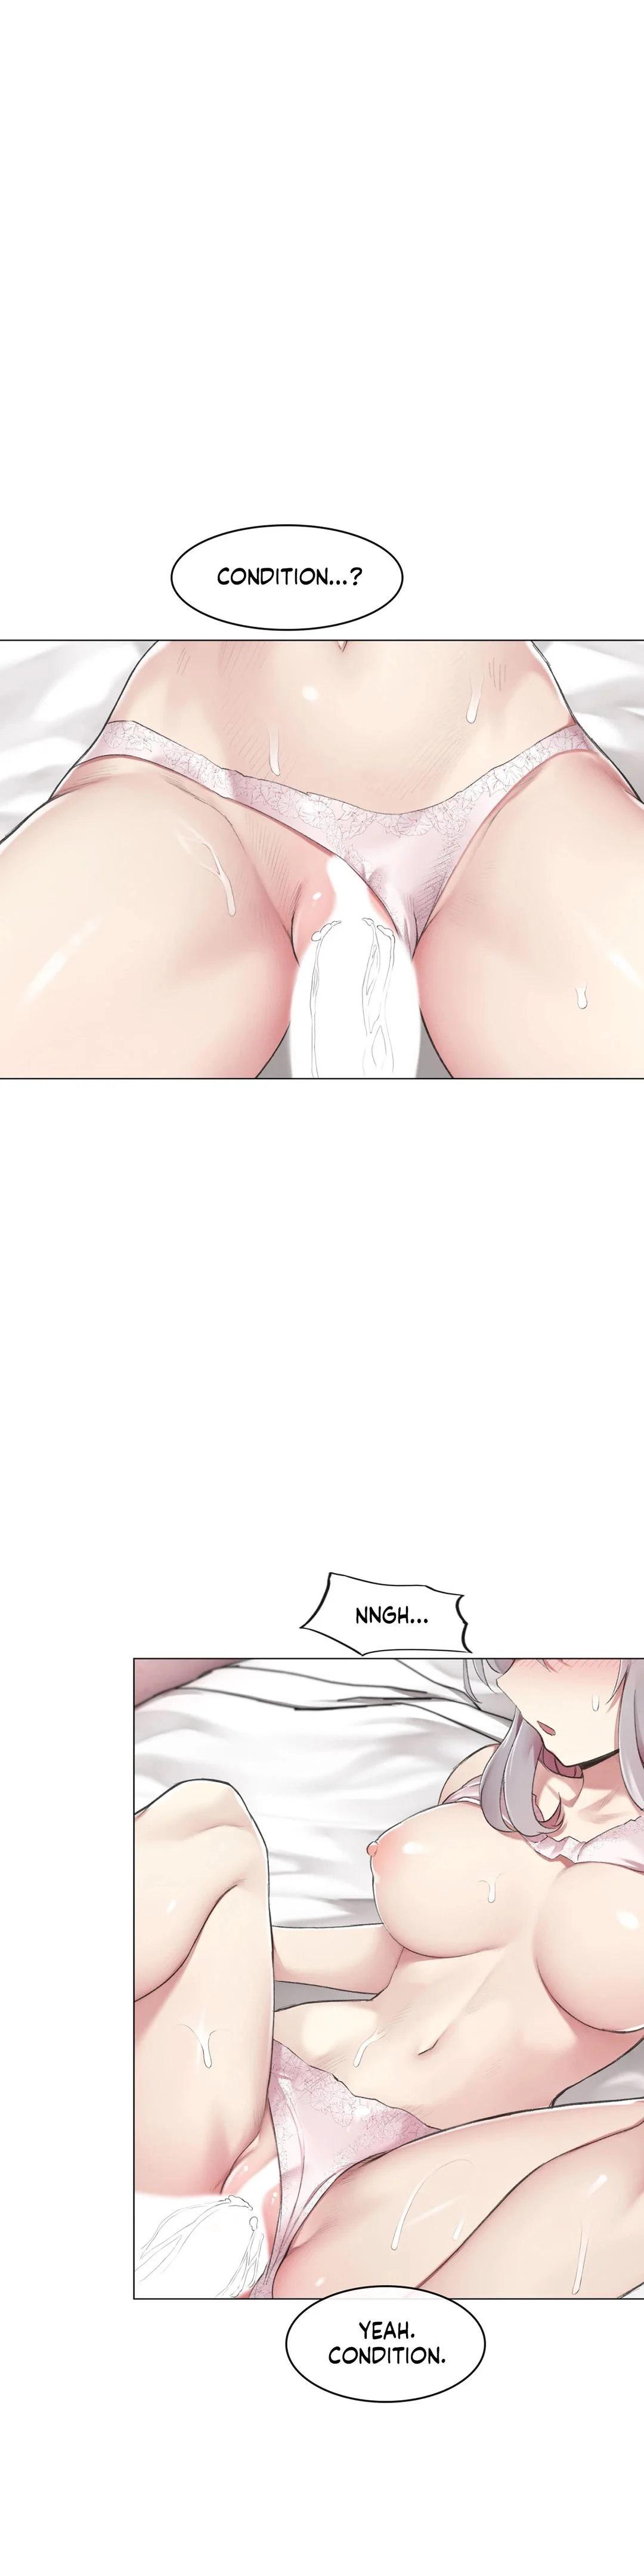 [Dumangoon, KONG_] Sexcape Room: Snap Off Ch.7/7 [English] [Manhwa PDF] Completed 105